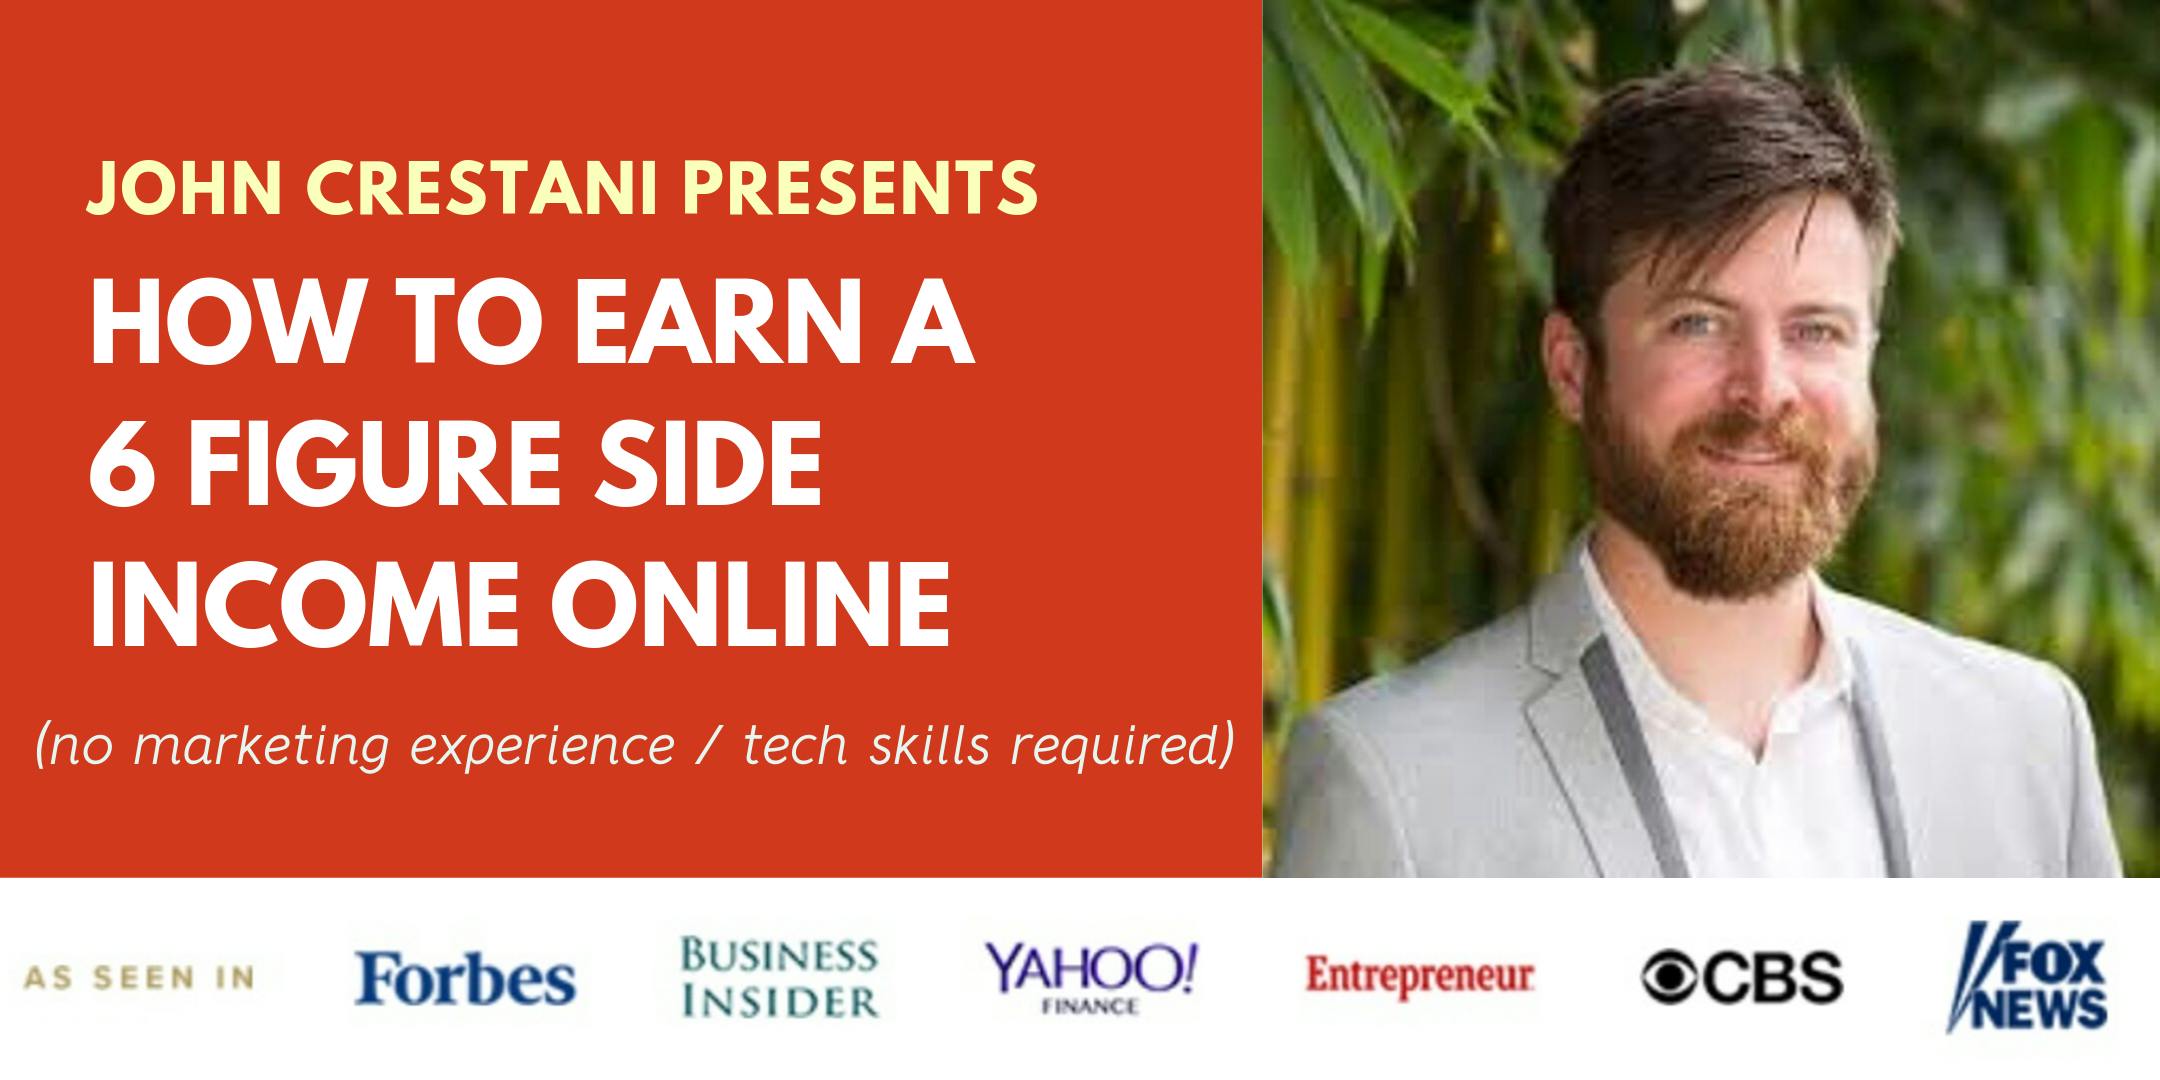 How To Earn a 6 Figure Side Income Online [WEBINAR] [Featured on Forbes]